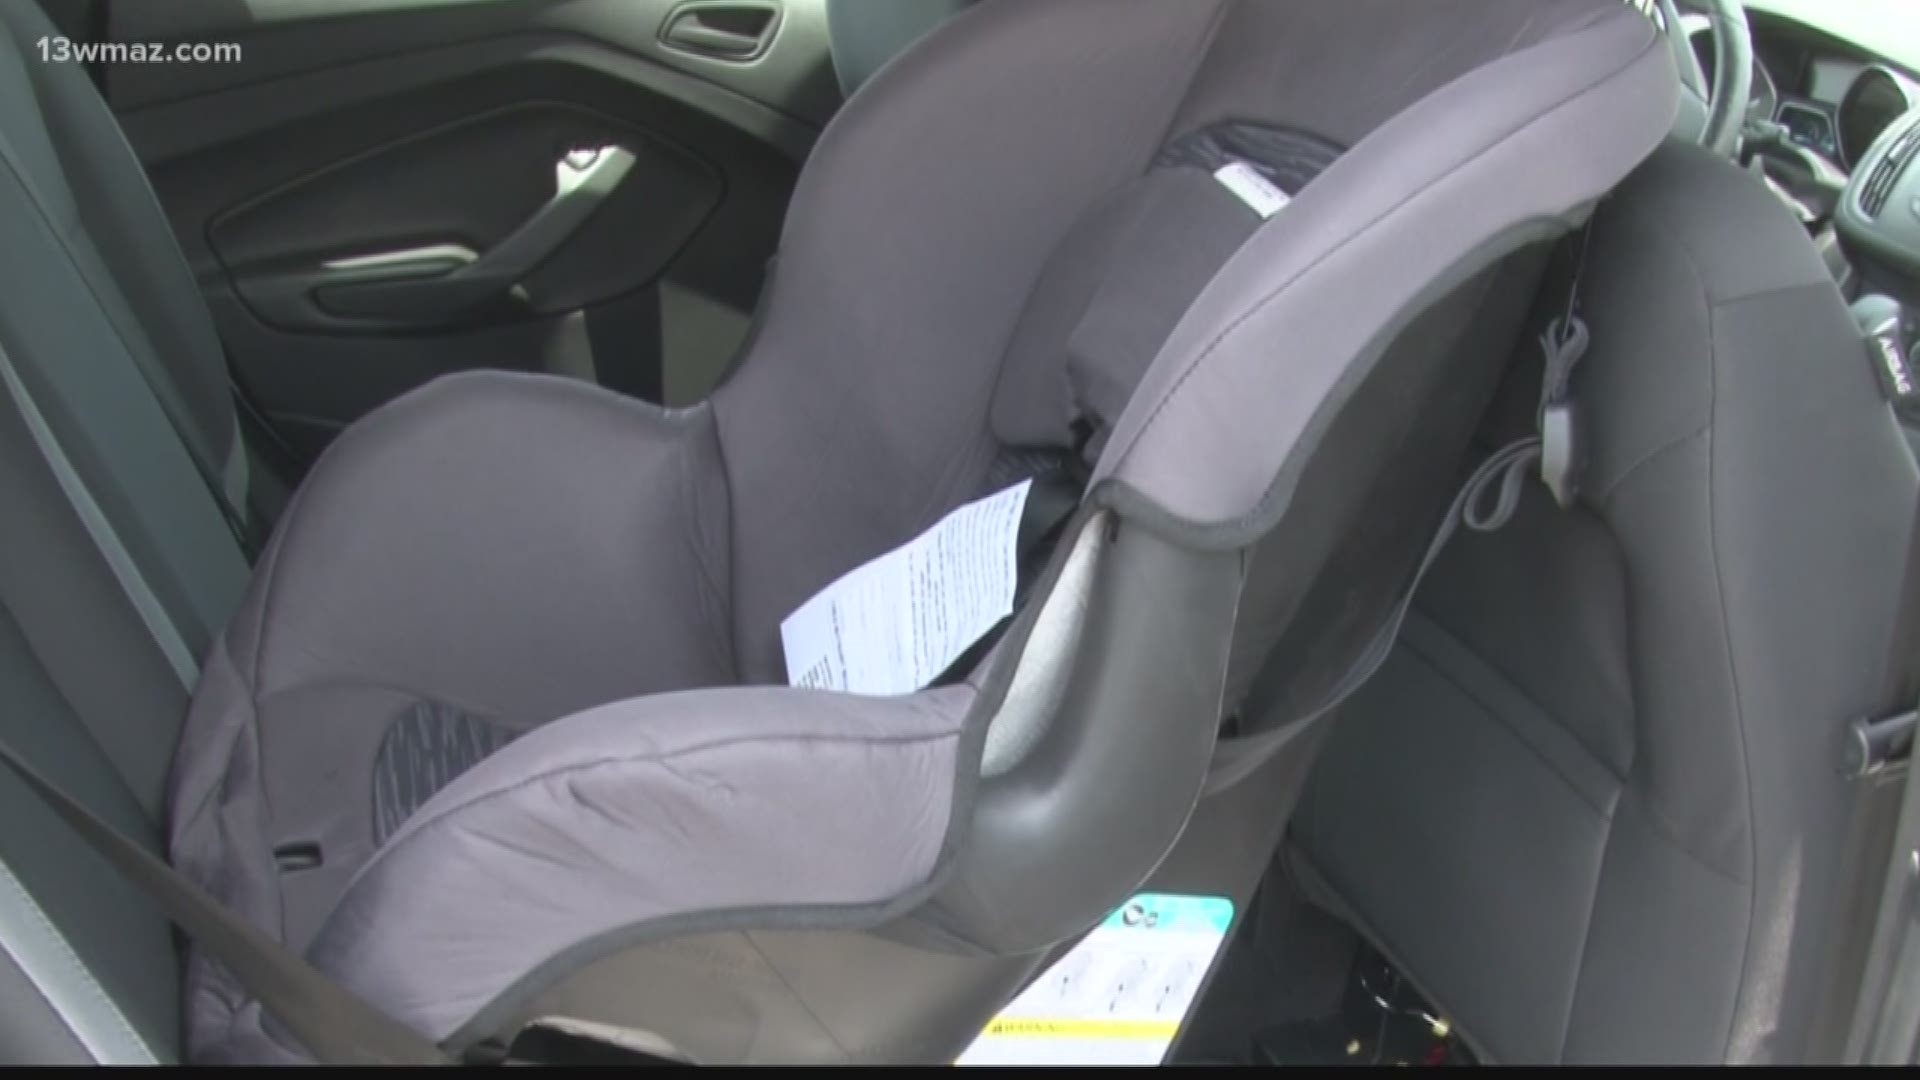 We came across a Facebook post from Central Georgians asking how long should you keep your child in a rear-facing car seat. Pepper Baker set out to verify Georgia's laws on the correct use of car seats.